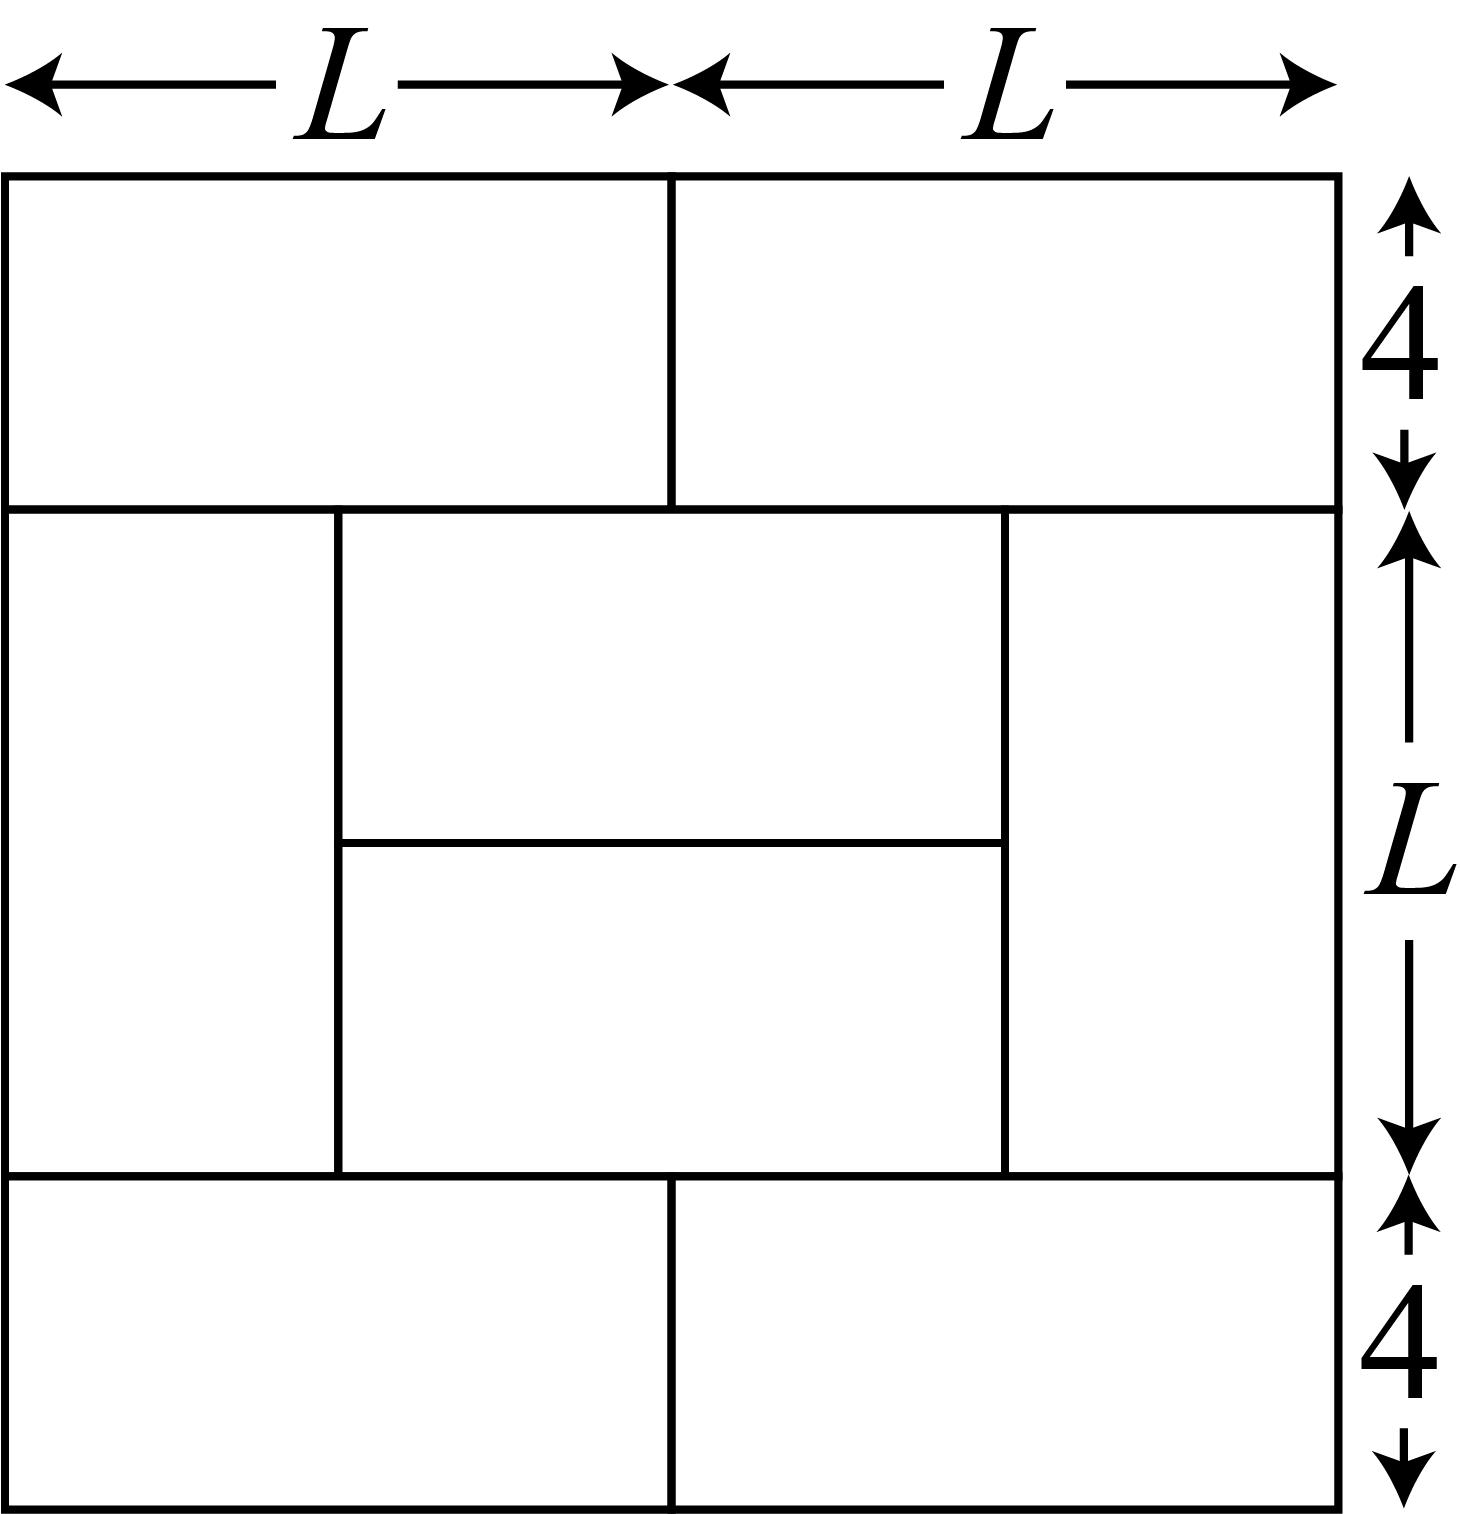 A horizontal side of the larger rectangle is made up of two segments of length L. A vertical side of the larger rectangle is made up of a segment of length 4, a segment of length L, and another segment of length 4.